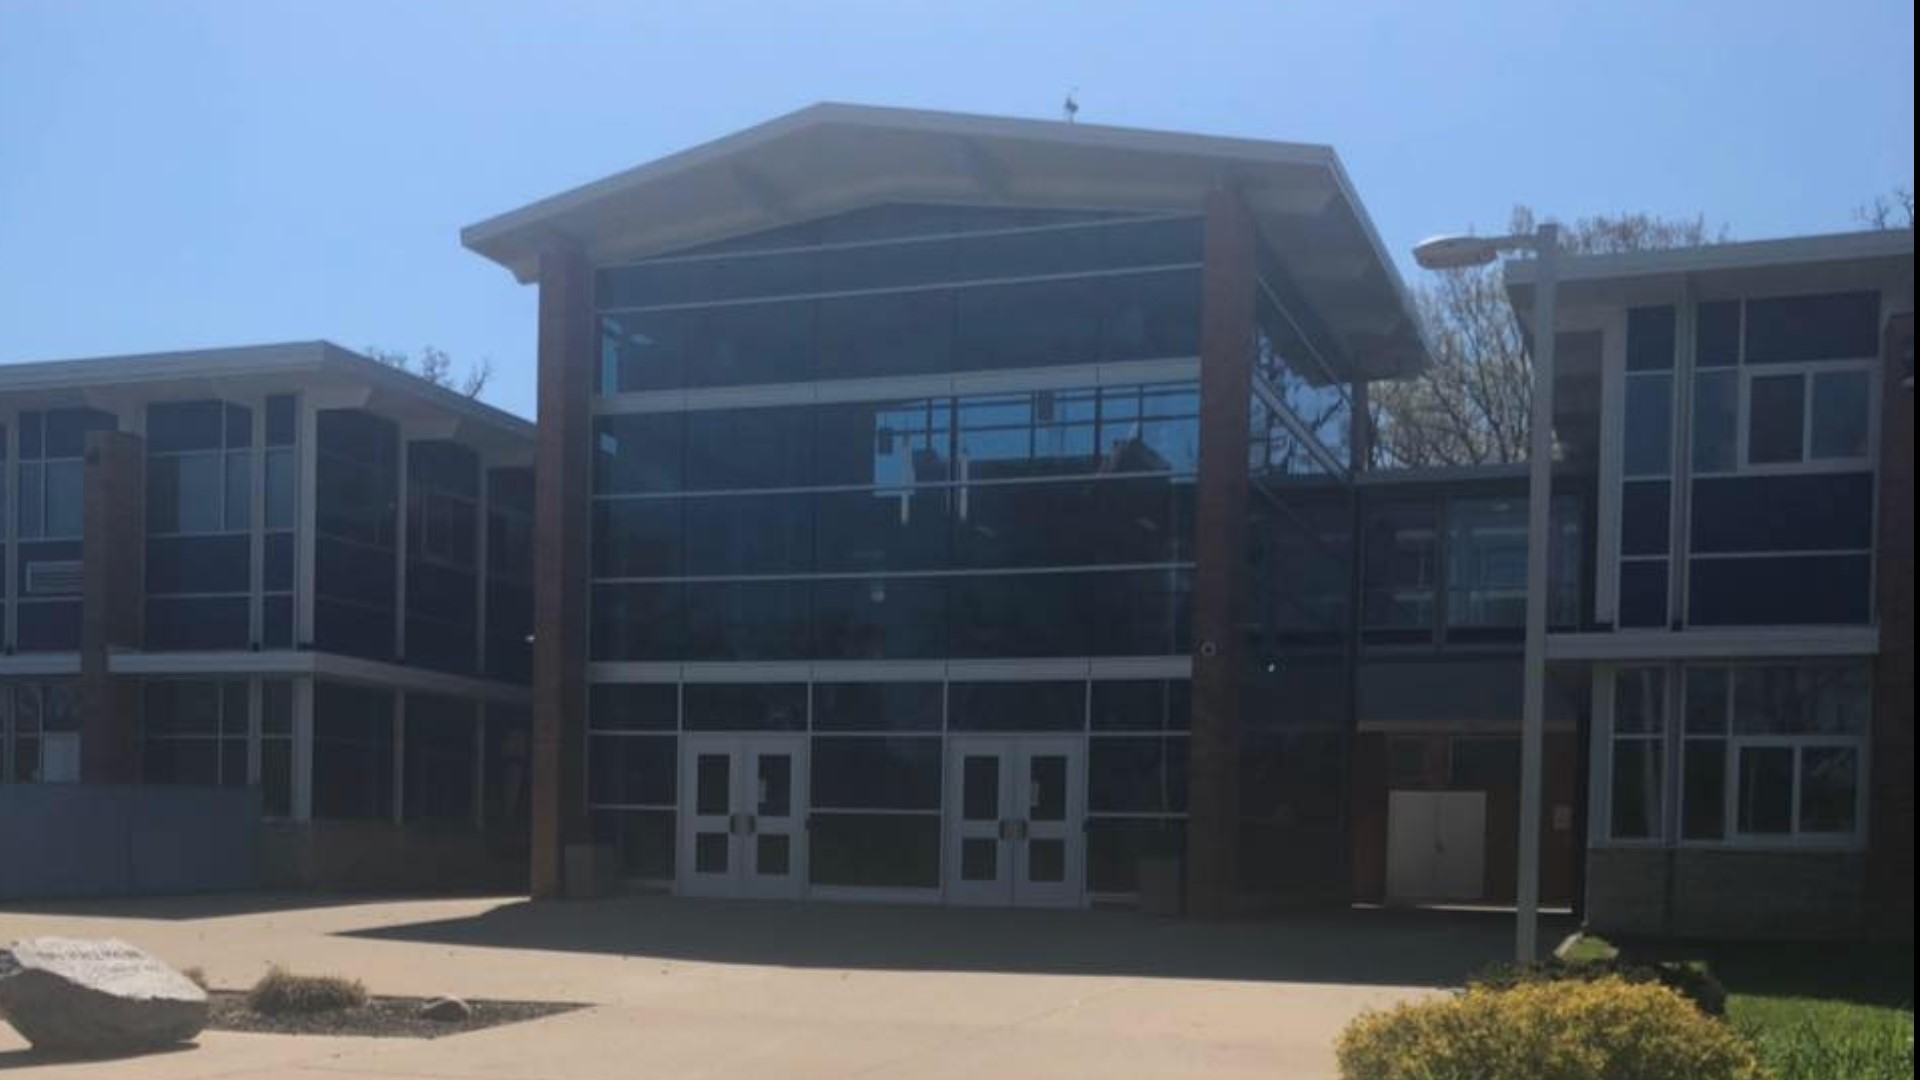 Kalamazoo authorities say a string of threats made against Kalamazoo County school all started with a 14-year-old who made one threat and inspired copycats.